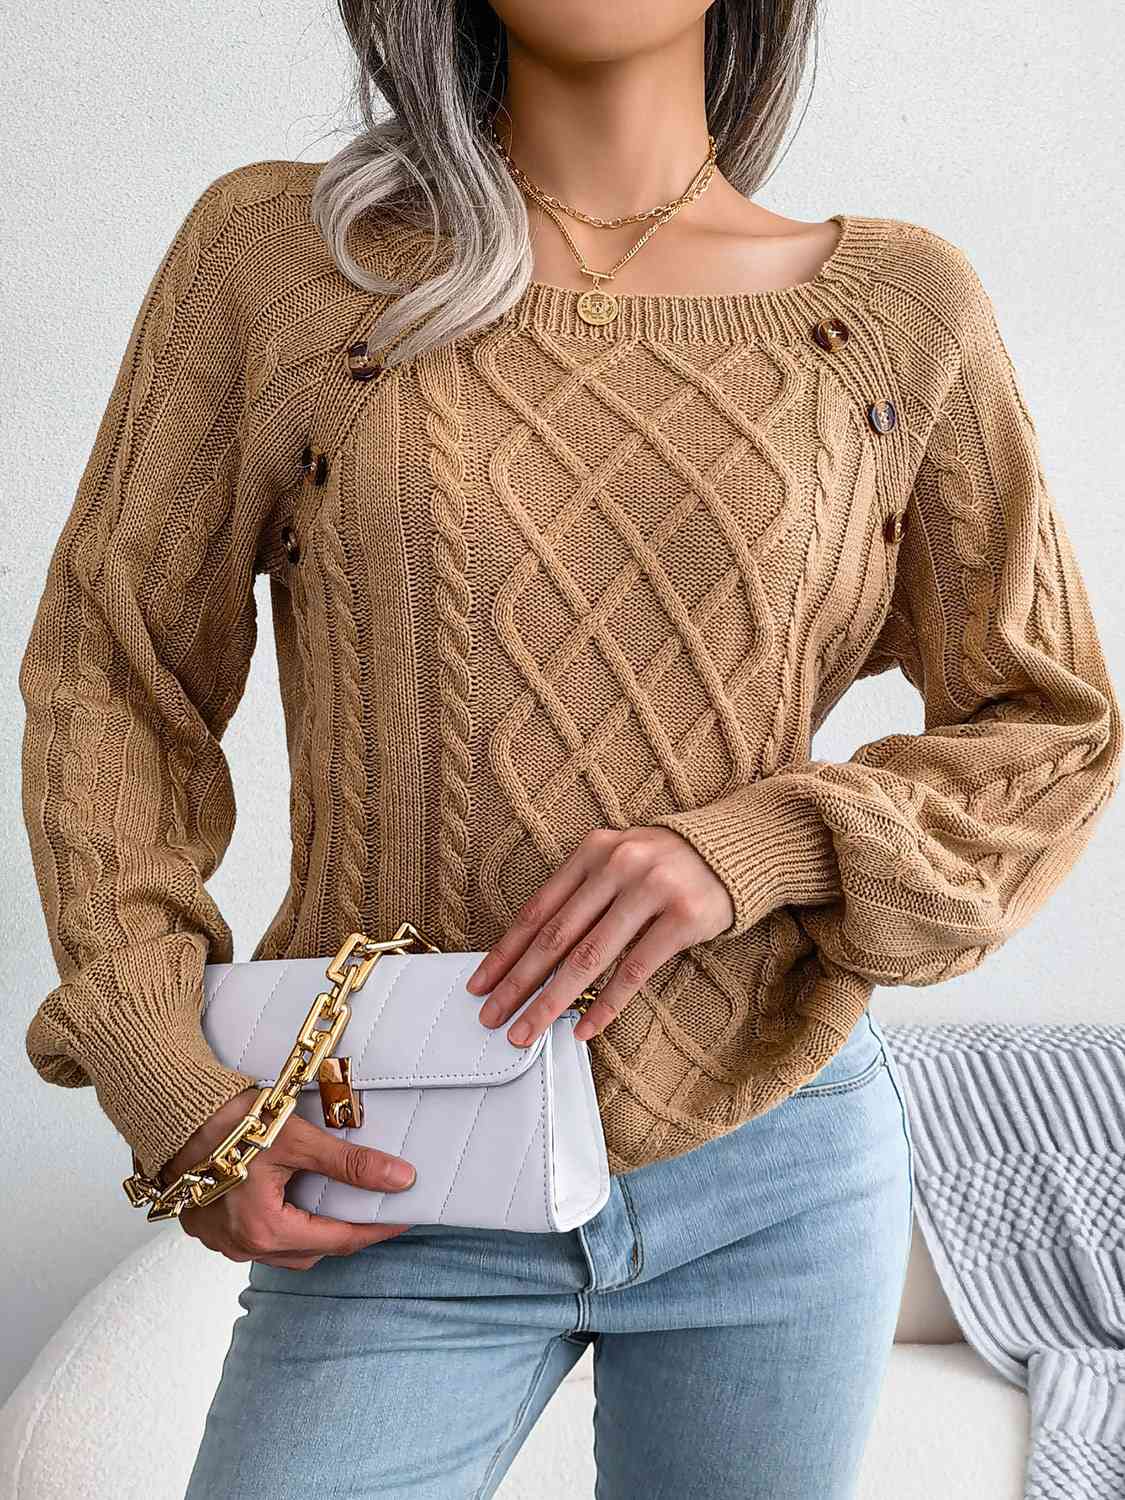 Decorative Button Cable-Knit Sweater BLUE ZONE PLANET